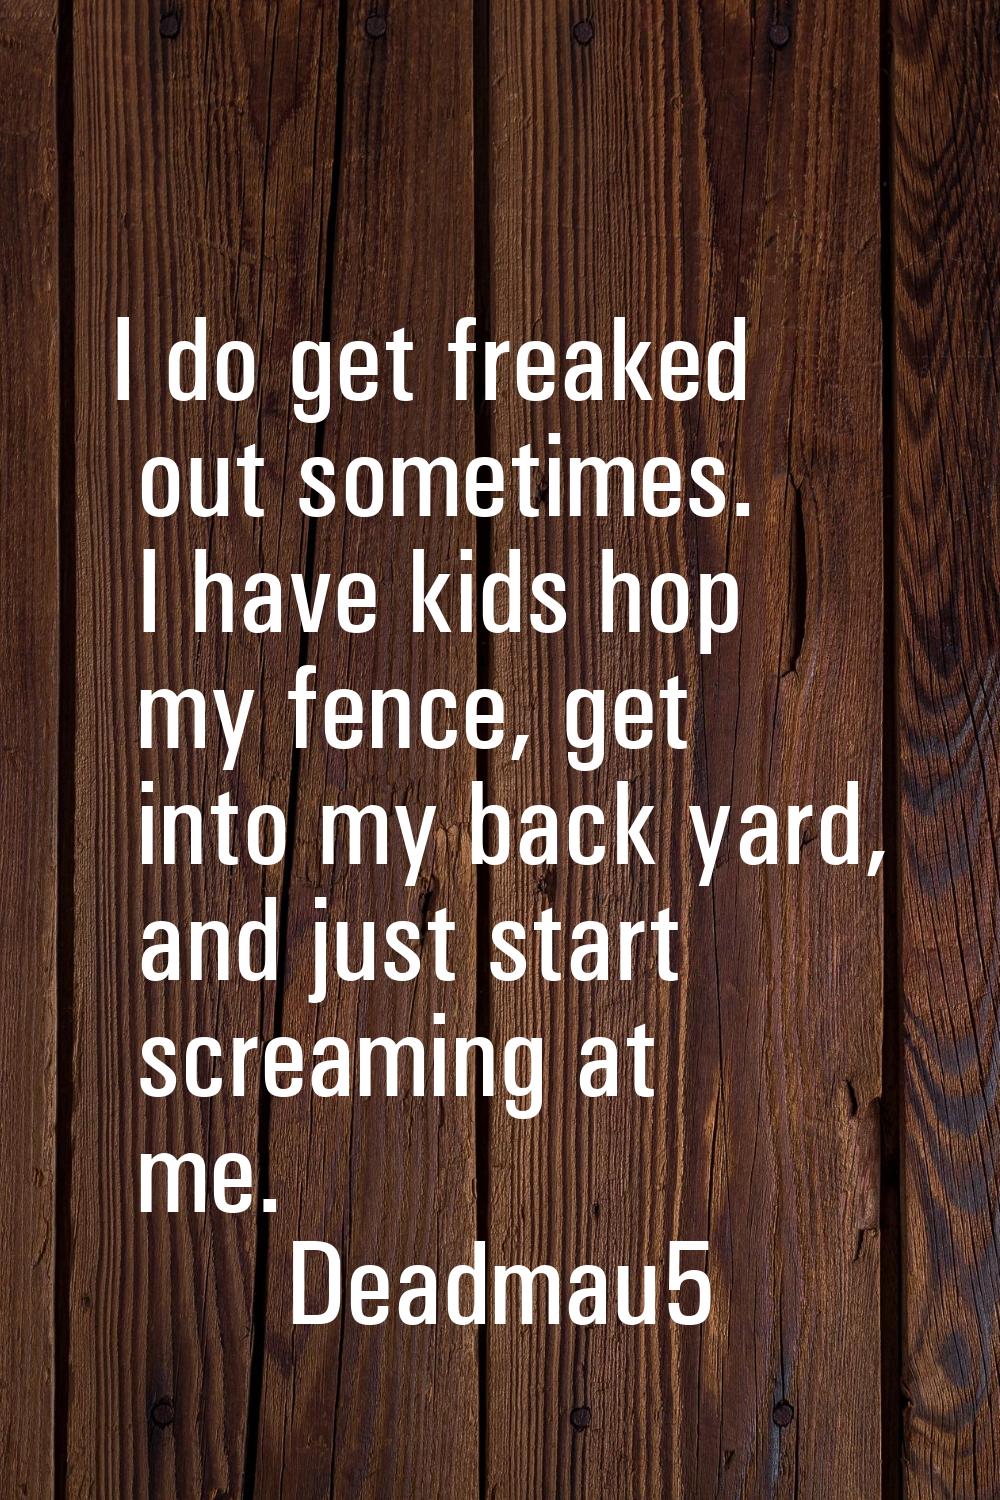 I do get freaked out sometimes. I have kids hop my fence, get into my back yard, and just start scr